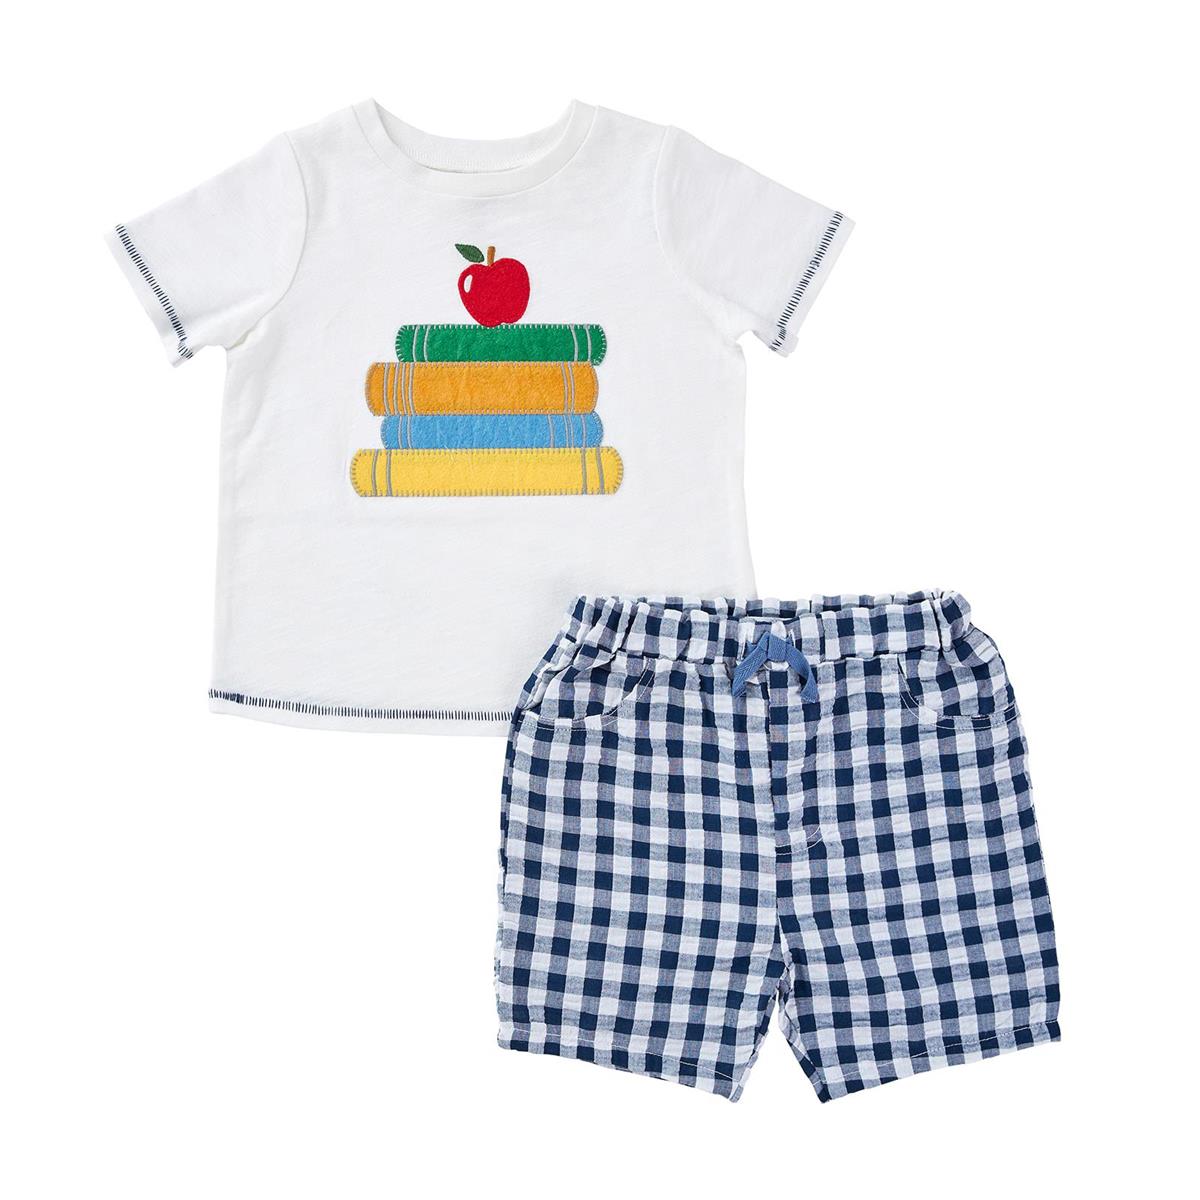 Mud Pie H2 Back to School Boy Apple Books Shirt & Short Set 11010432 Choose Size | BABY FAMILY GIFTS